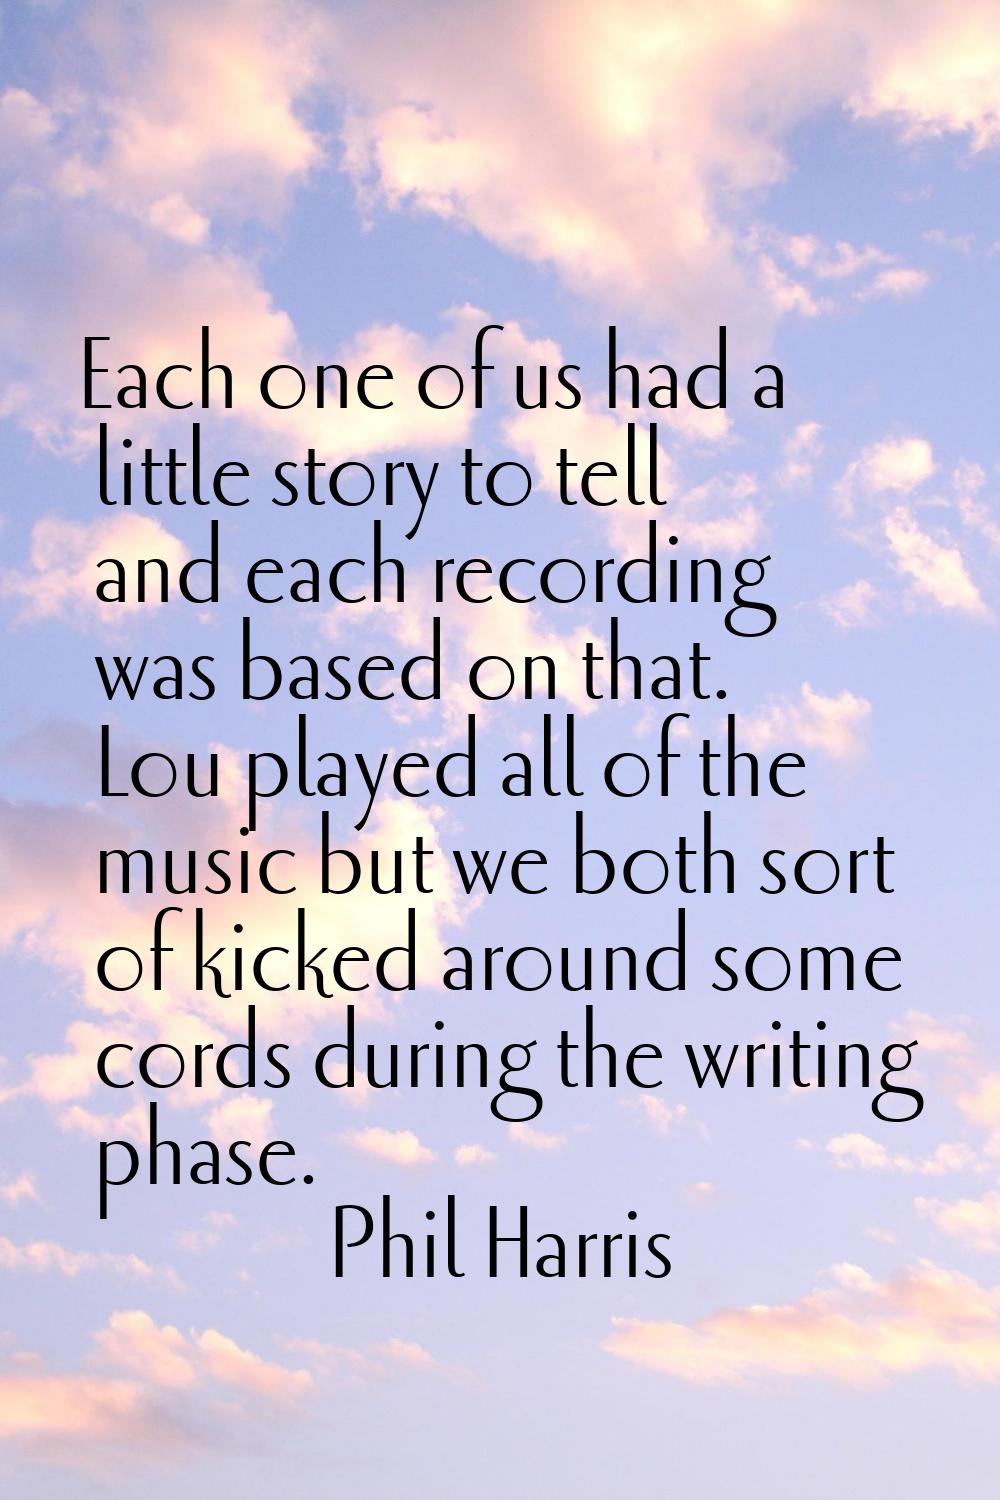 Each one of us had a little story to tell and each recording was based on that. Lou played all of t